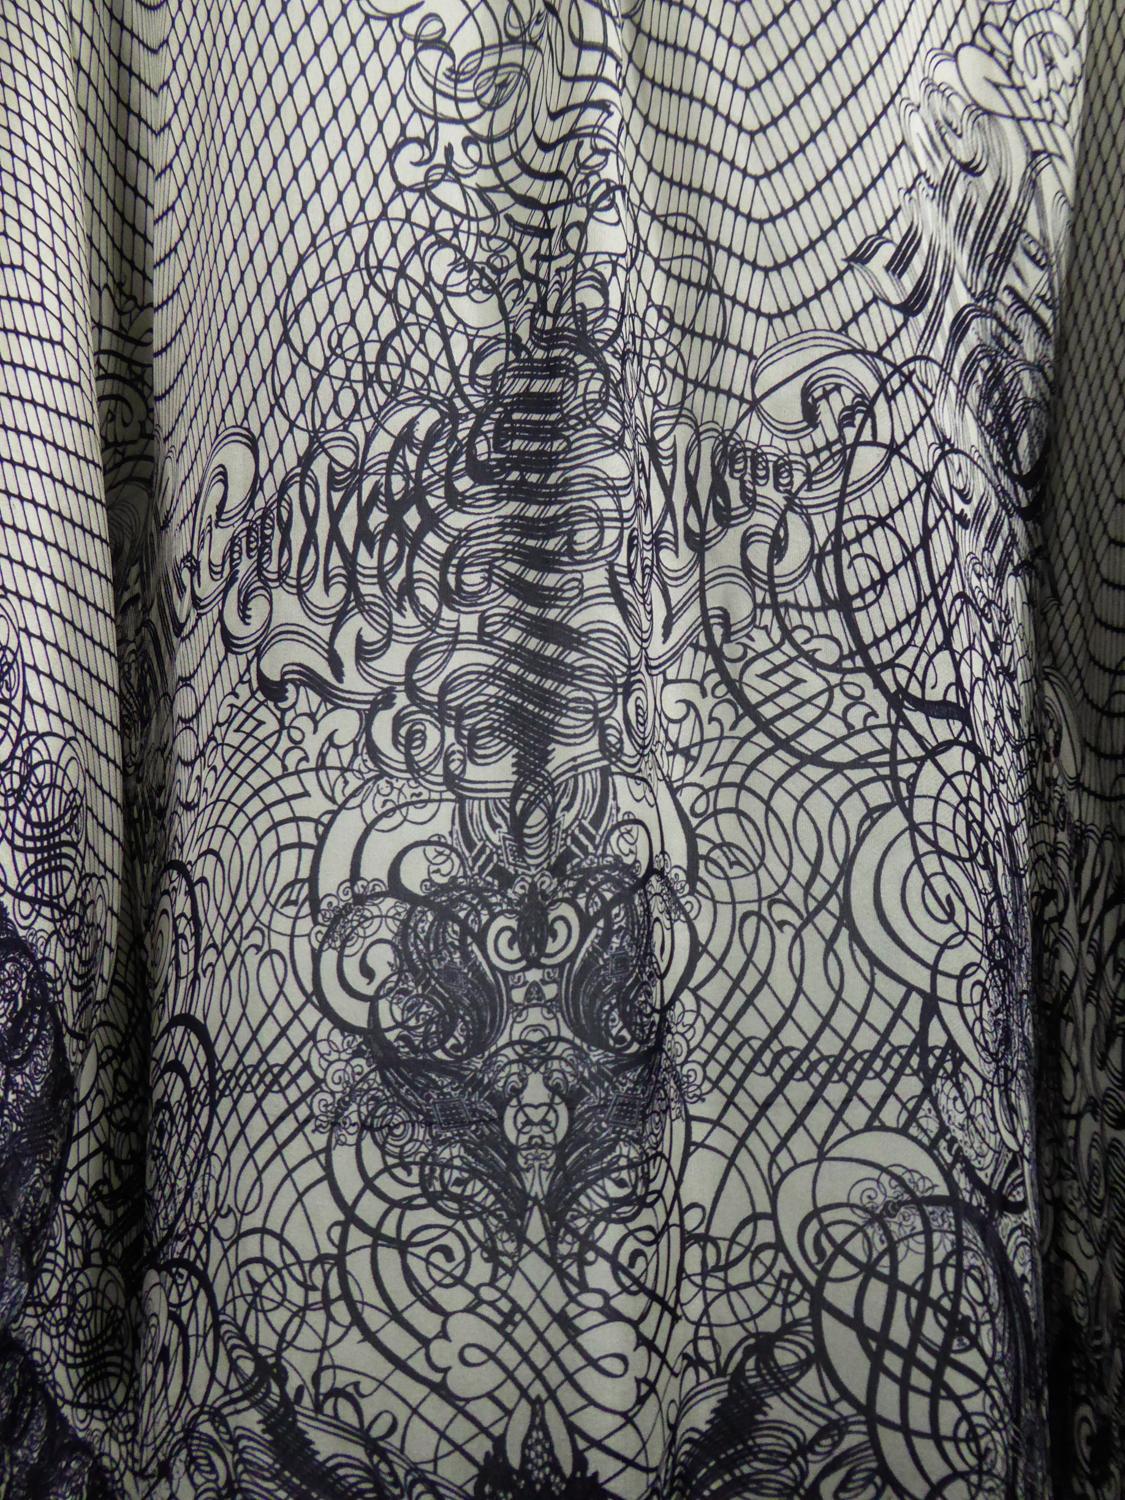 A Jean-Paul Gaultier Tunic Dress in Printed Silk - Spring / Summer 2009 7